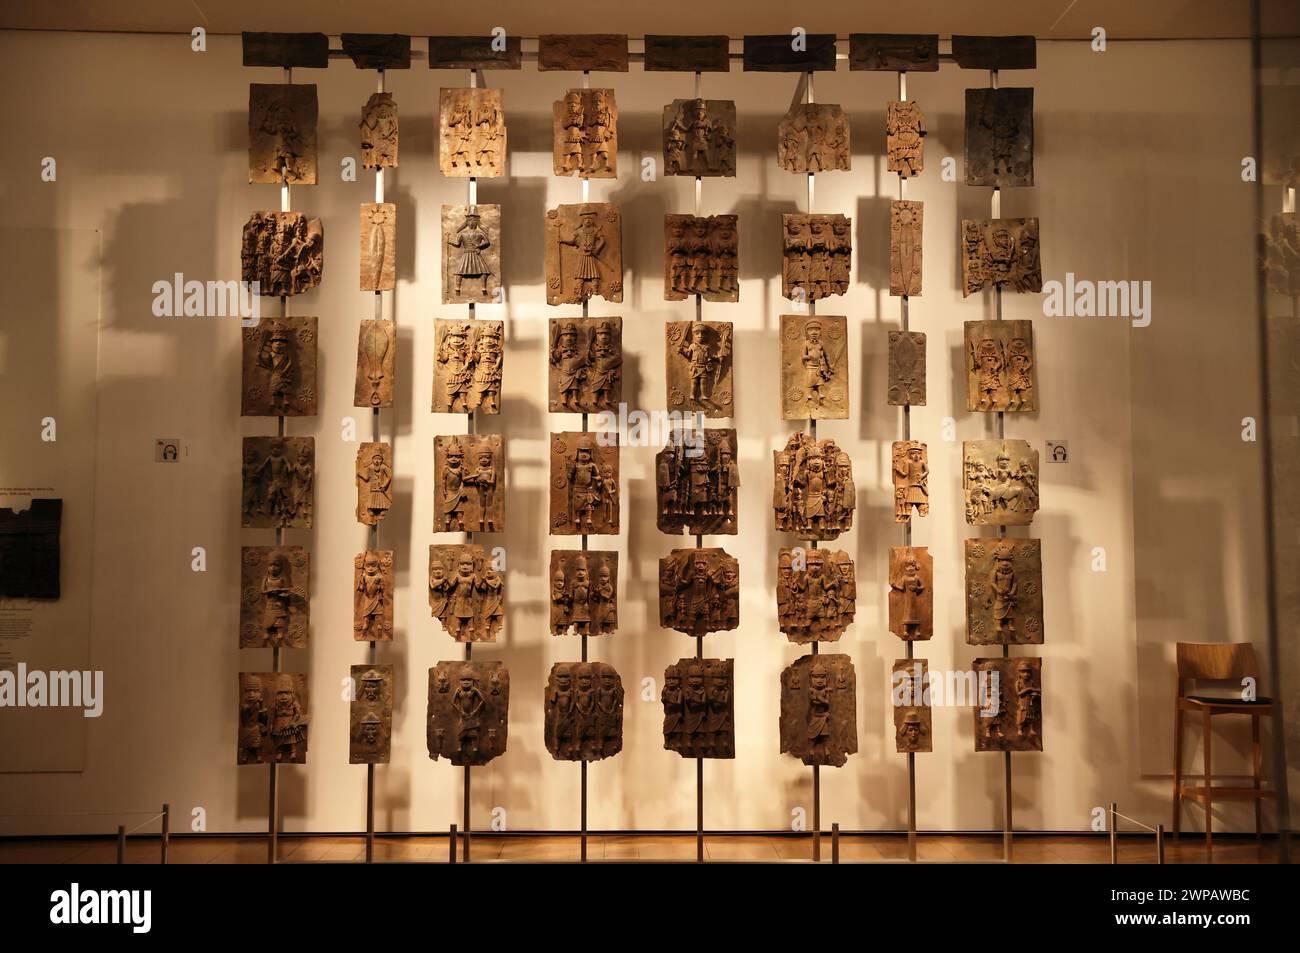 The Benin Bronzes, plaques made in the West African Kingdom of Benin 1550-1650,  to decorate the Oba's palace. The British attacked Benin City in 1897. Stock Photo